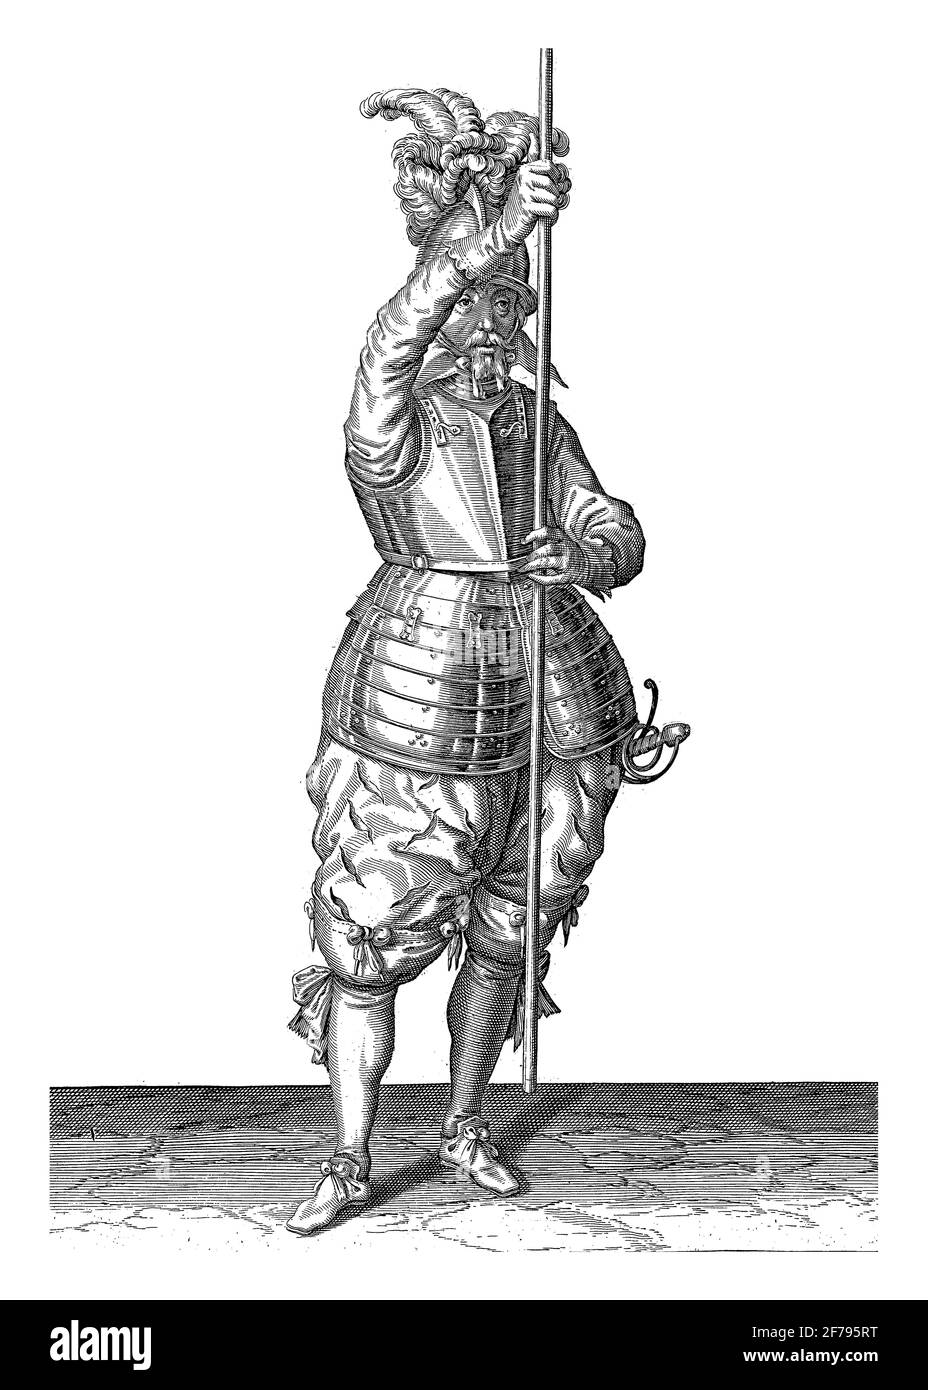 A full-length soldier holding a skewer (lance) with both hands upright in front of him slightly above the ground, this is the second act of placing th Stock Photo